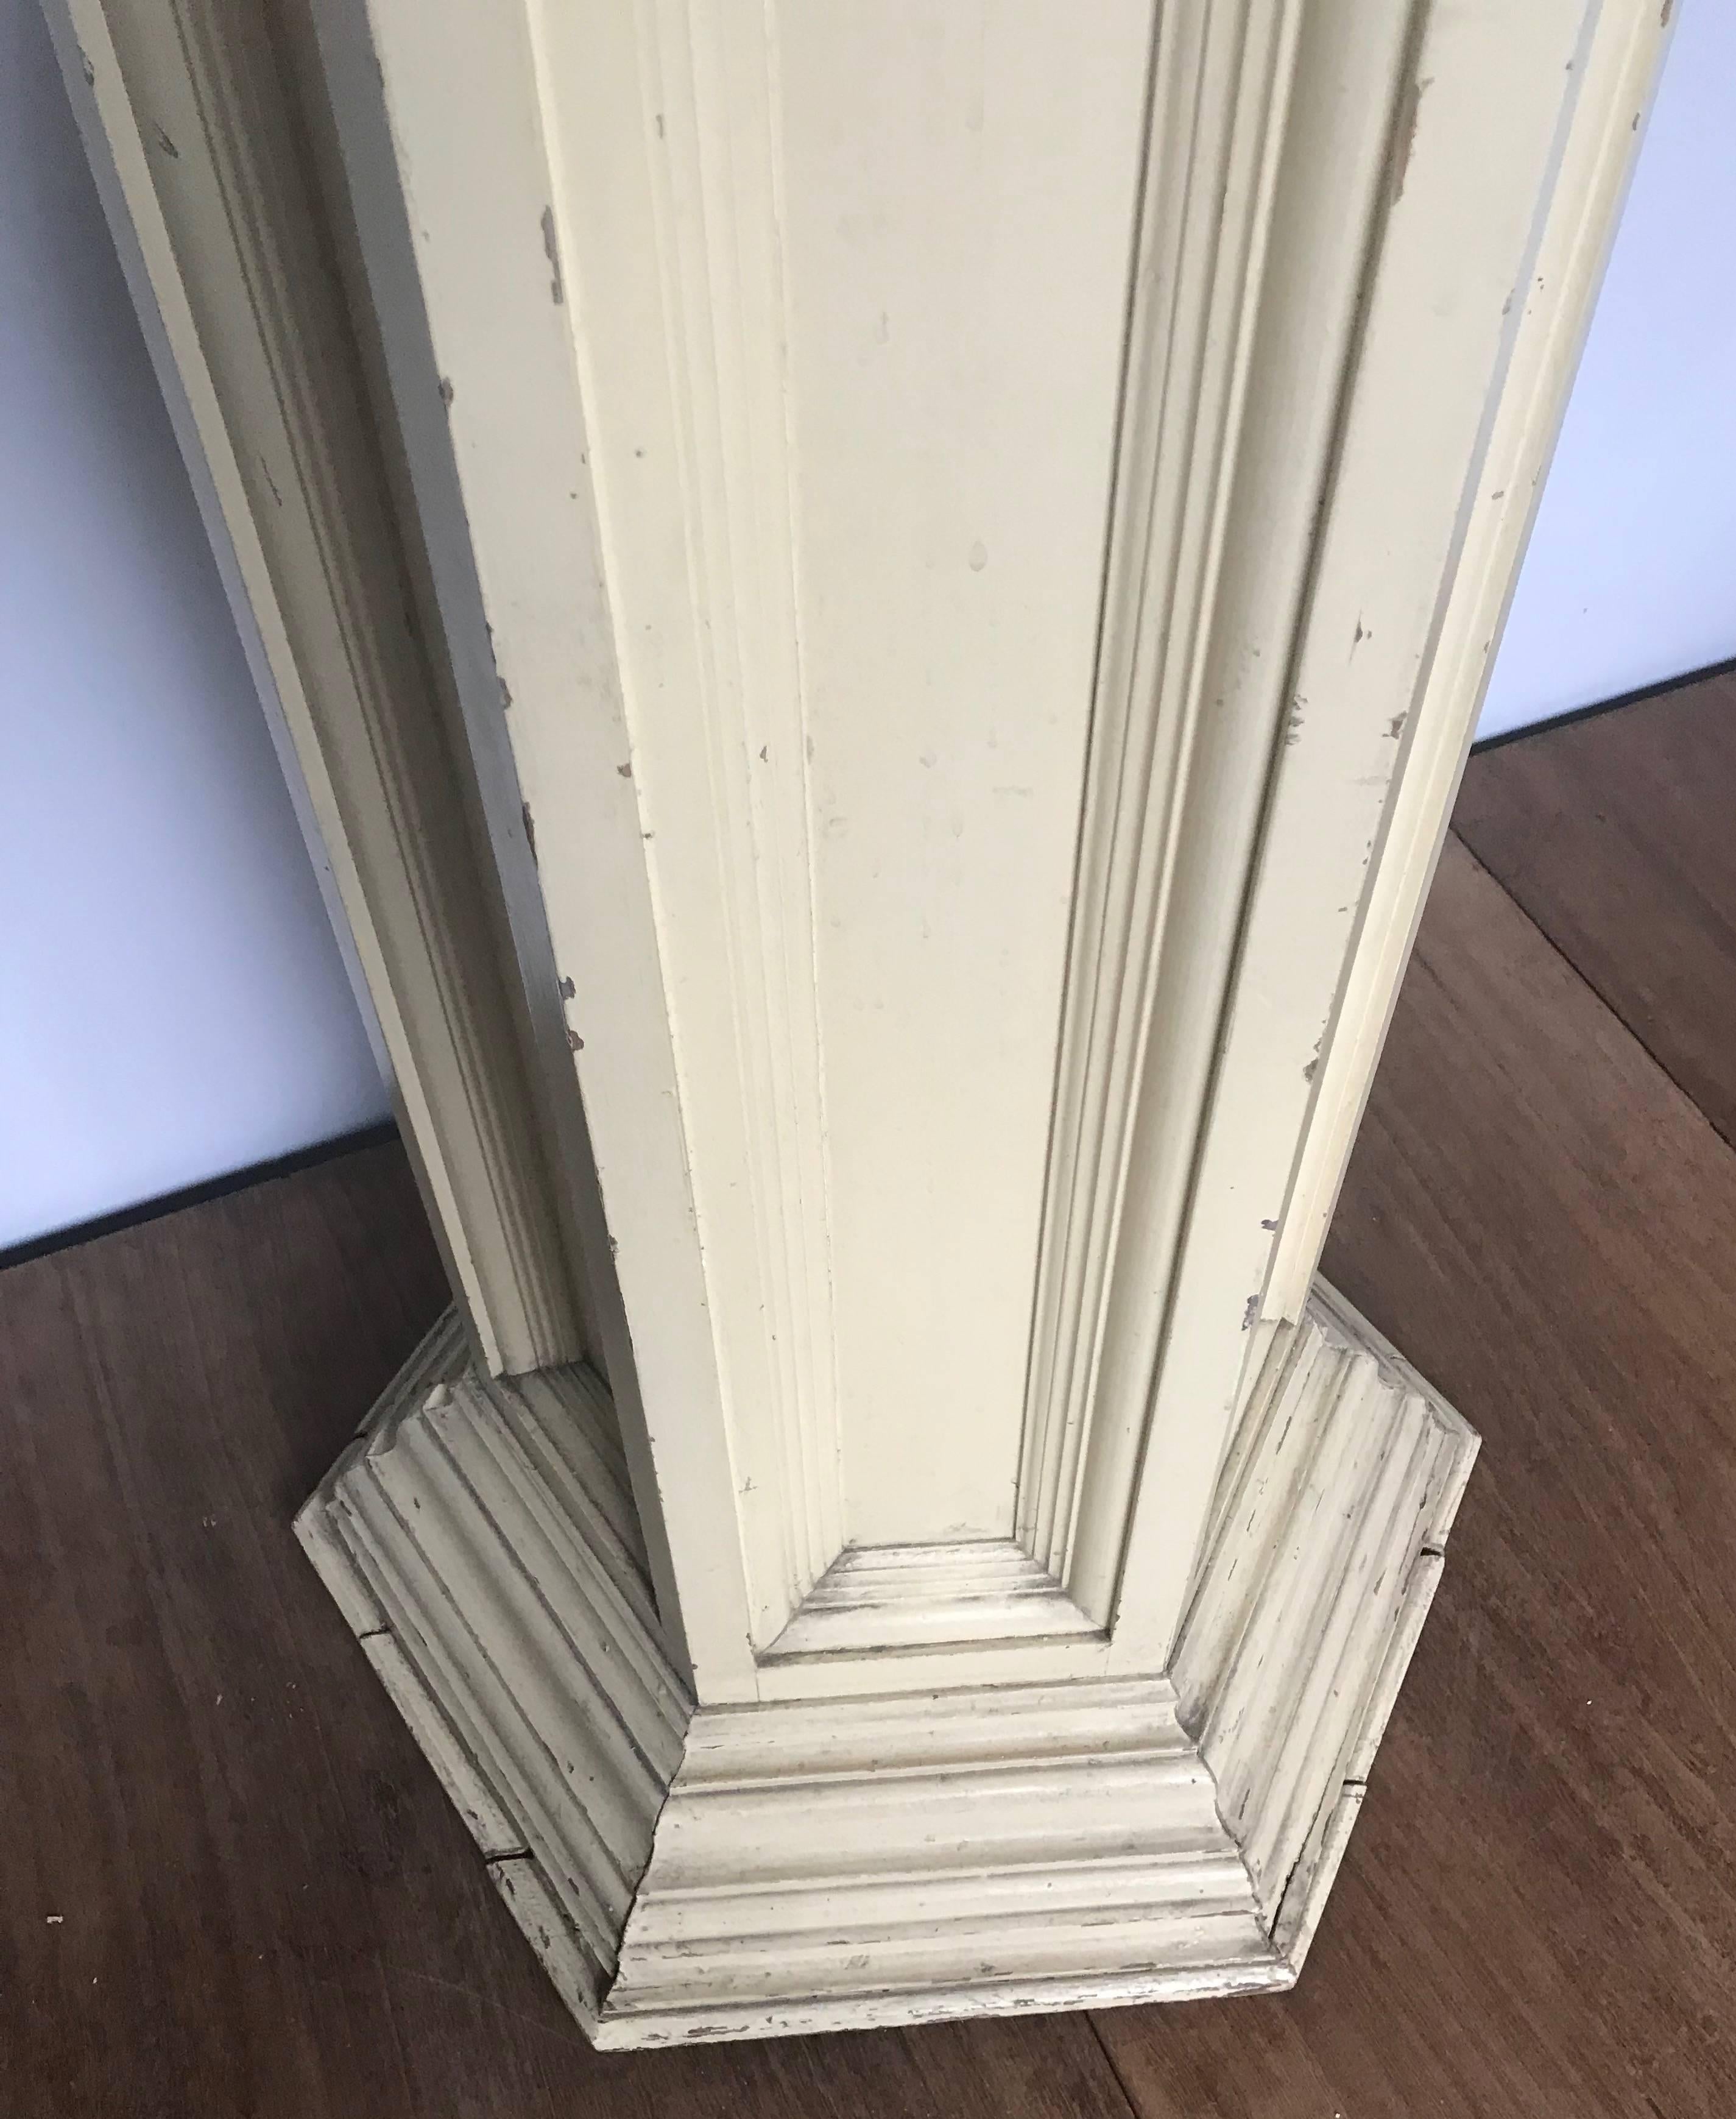 Details about   Shabby Chic Pedestal Pillar in Aged White Paint for Table Top Displays 